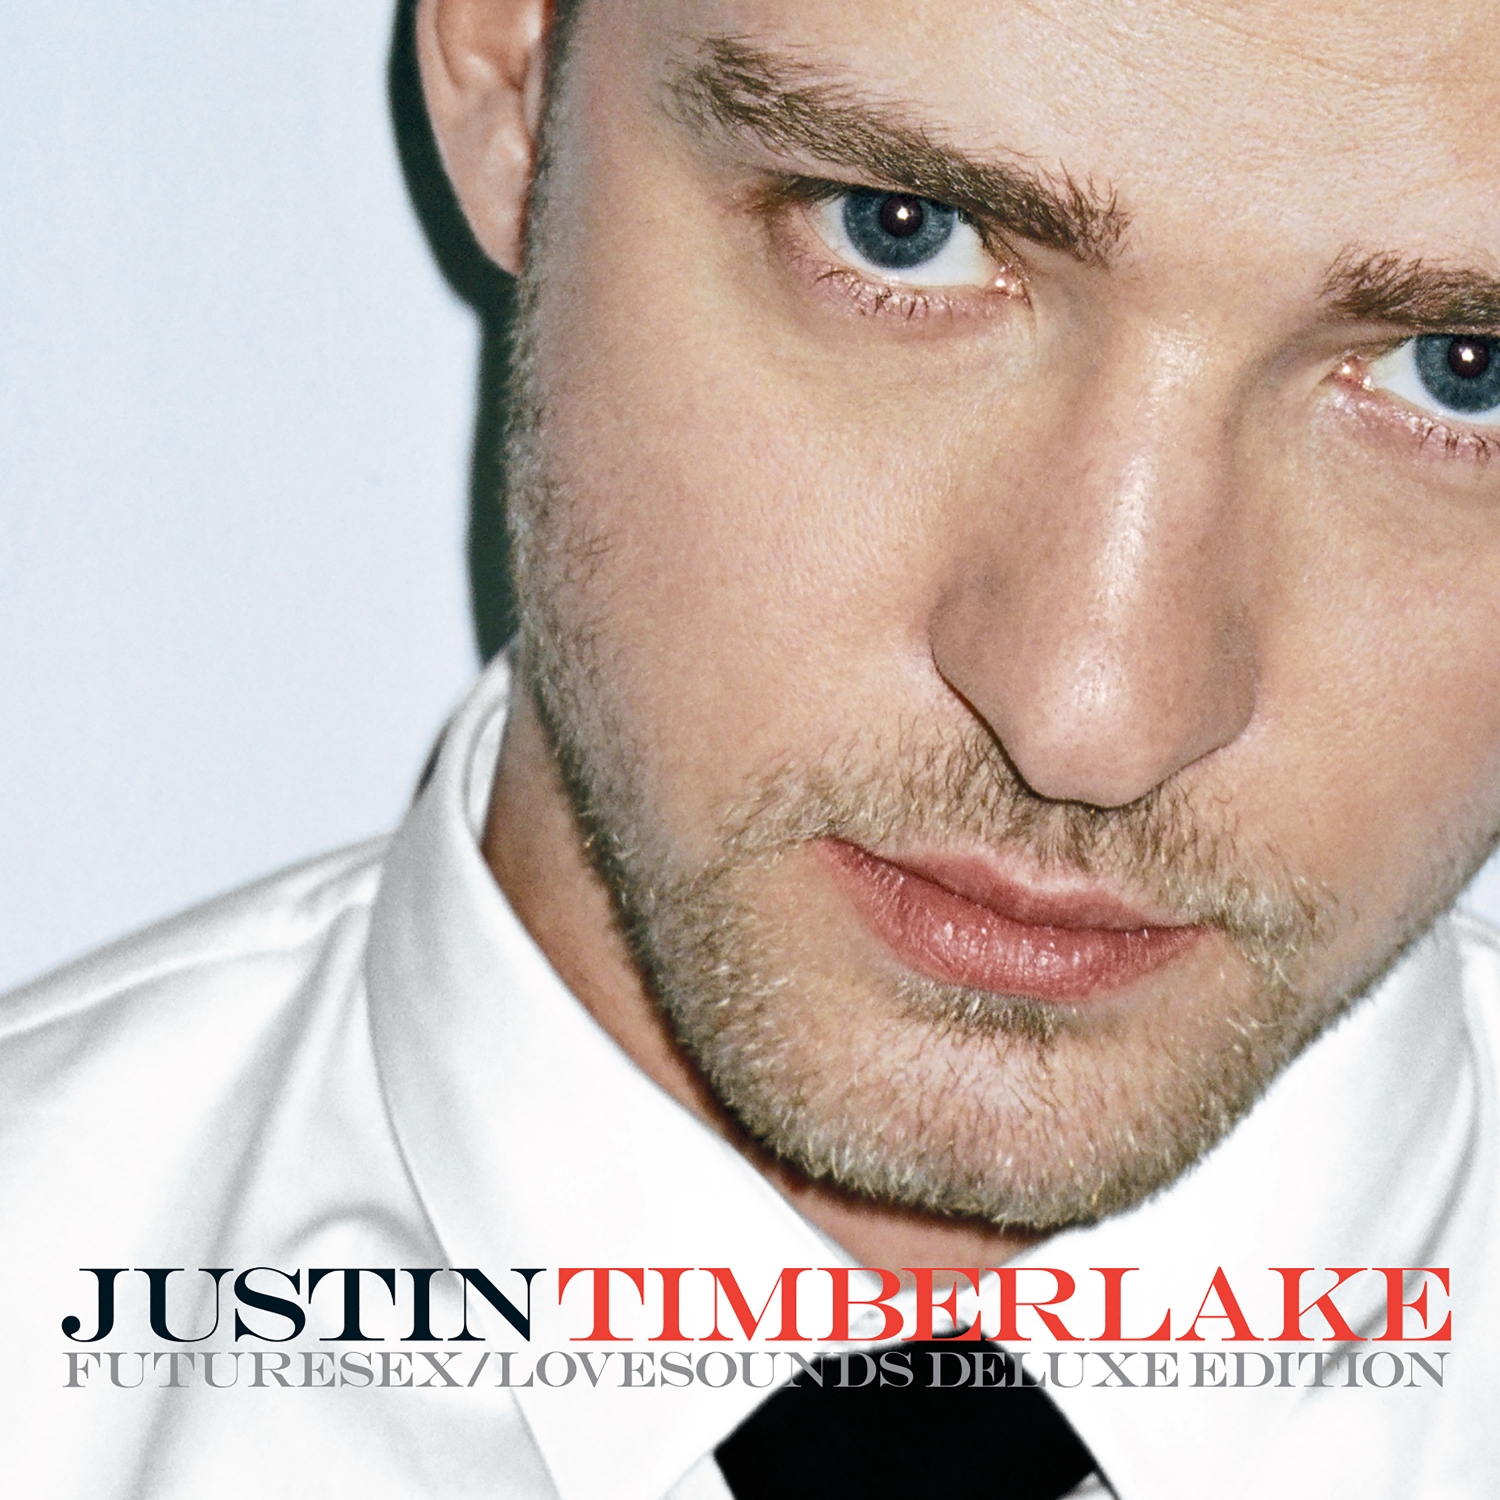 Justin Timberlake - FutureSex / LoveSounds (Deluxe)
Released: November 27, 2007 
Label: Jive Records
